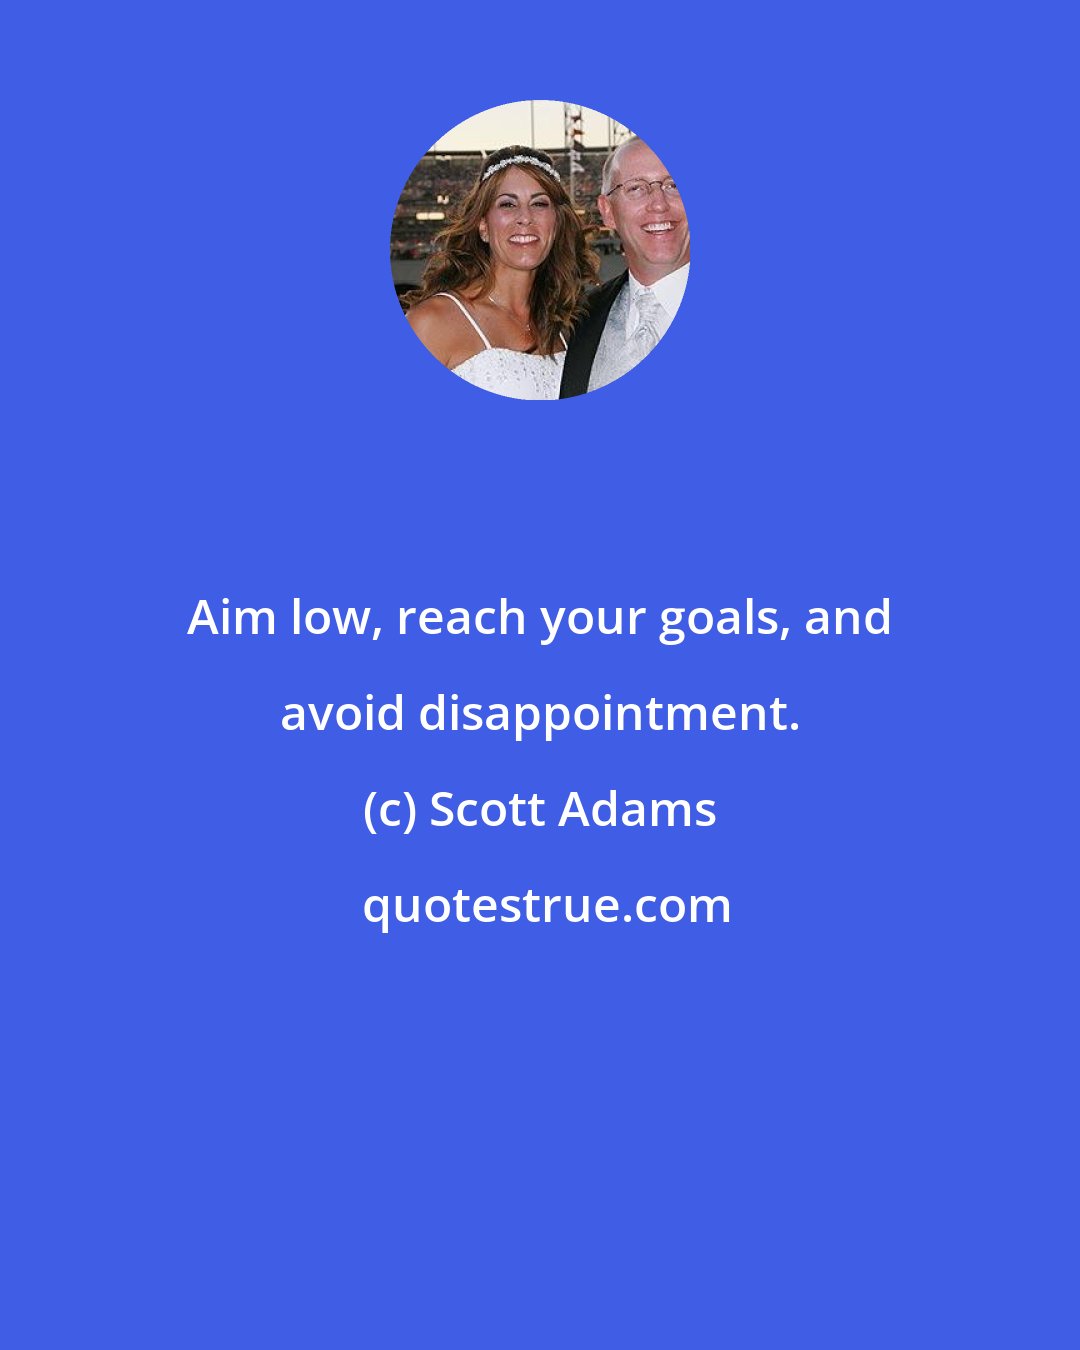 Scott Adams: Aim low, reach your goals, and avoid disappointment.